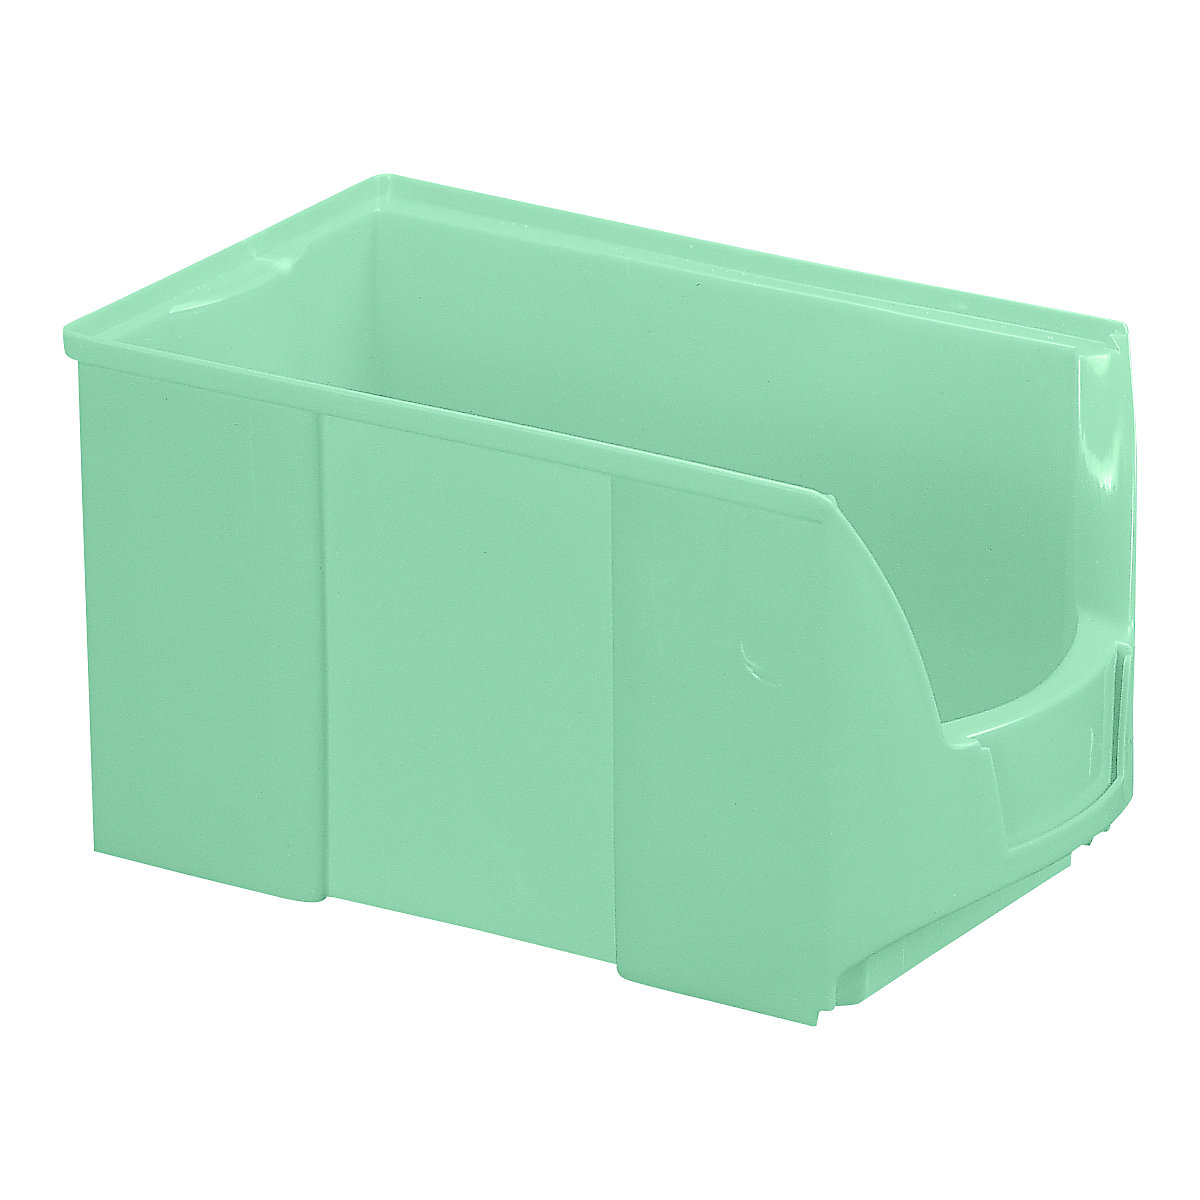 FUTURA open fronted storage bin made of polyethylene, LxWxH 360 x 208 x 201 mm, pack of 8, green-15